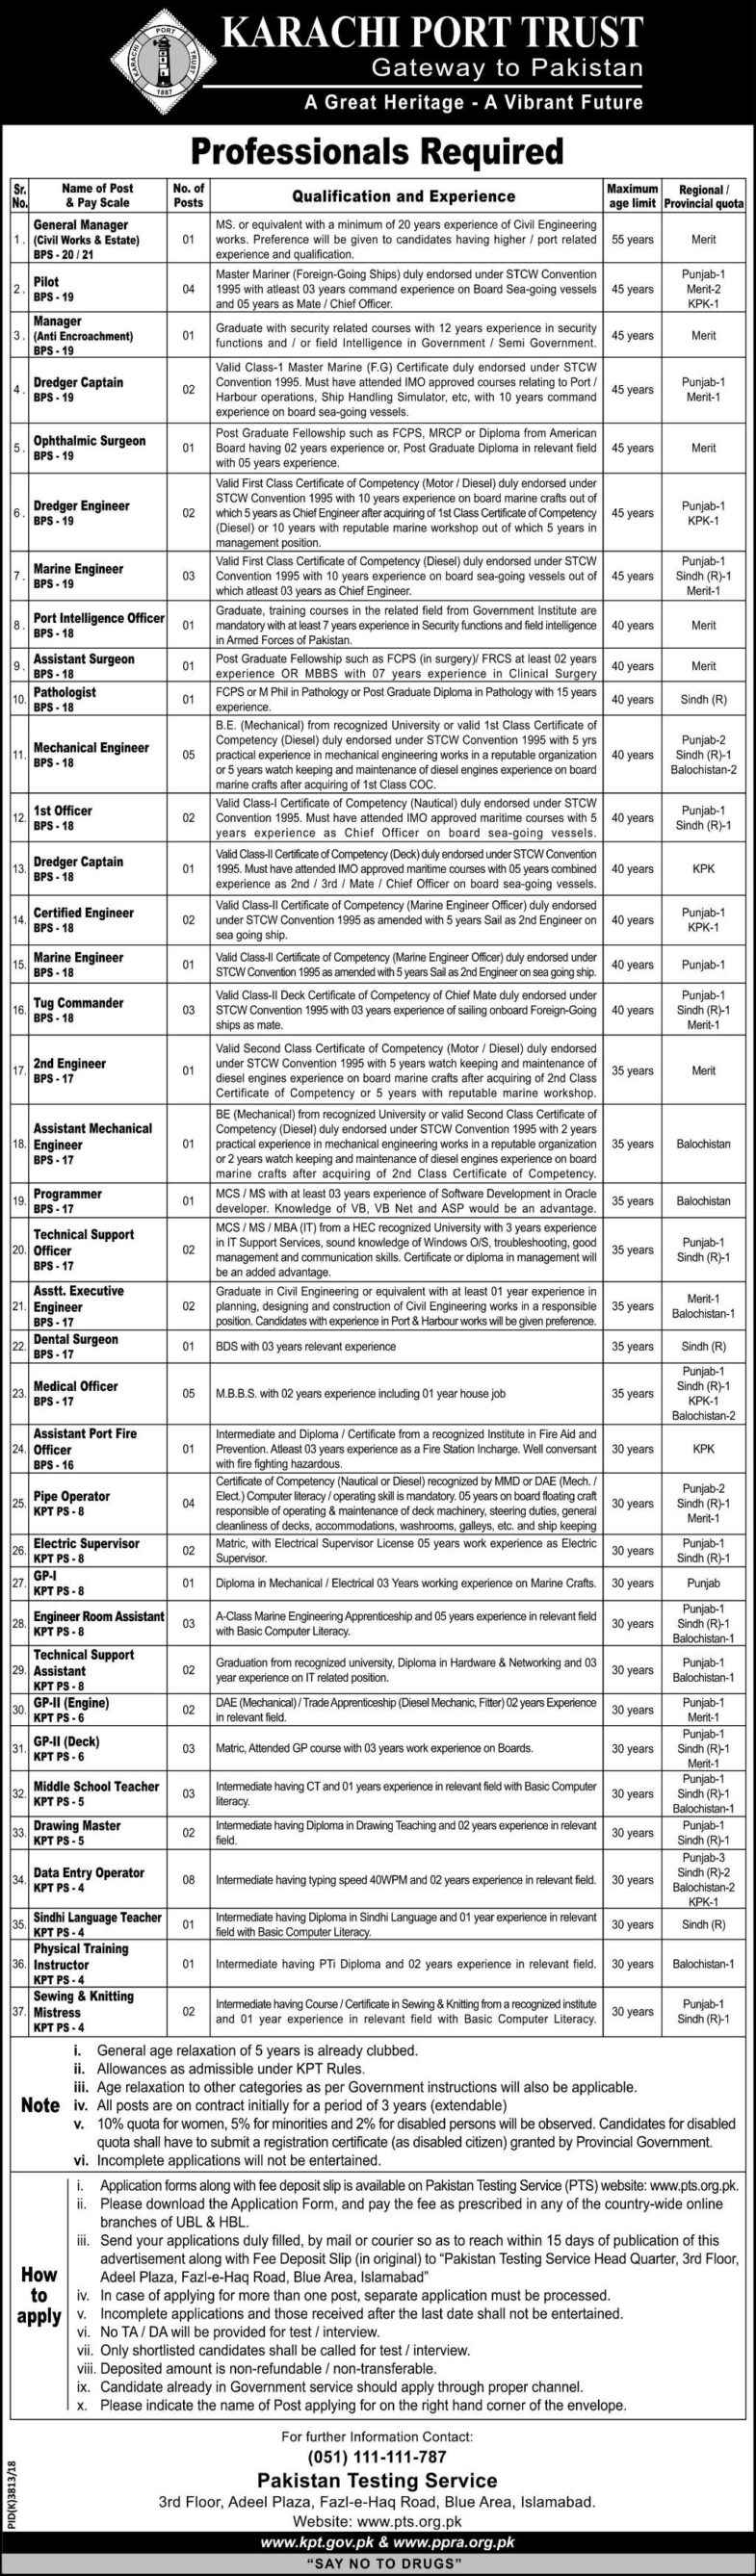 Karachi Port Trust (KPT) Govt of Pakistan Jobs 2019 for 79+ DEOs, IT, Engineering, DAE, Medical, Marine, Teaching, Management & Other Posts (Download PTS Form)